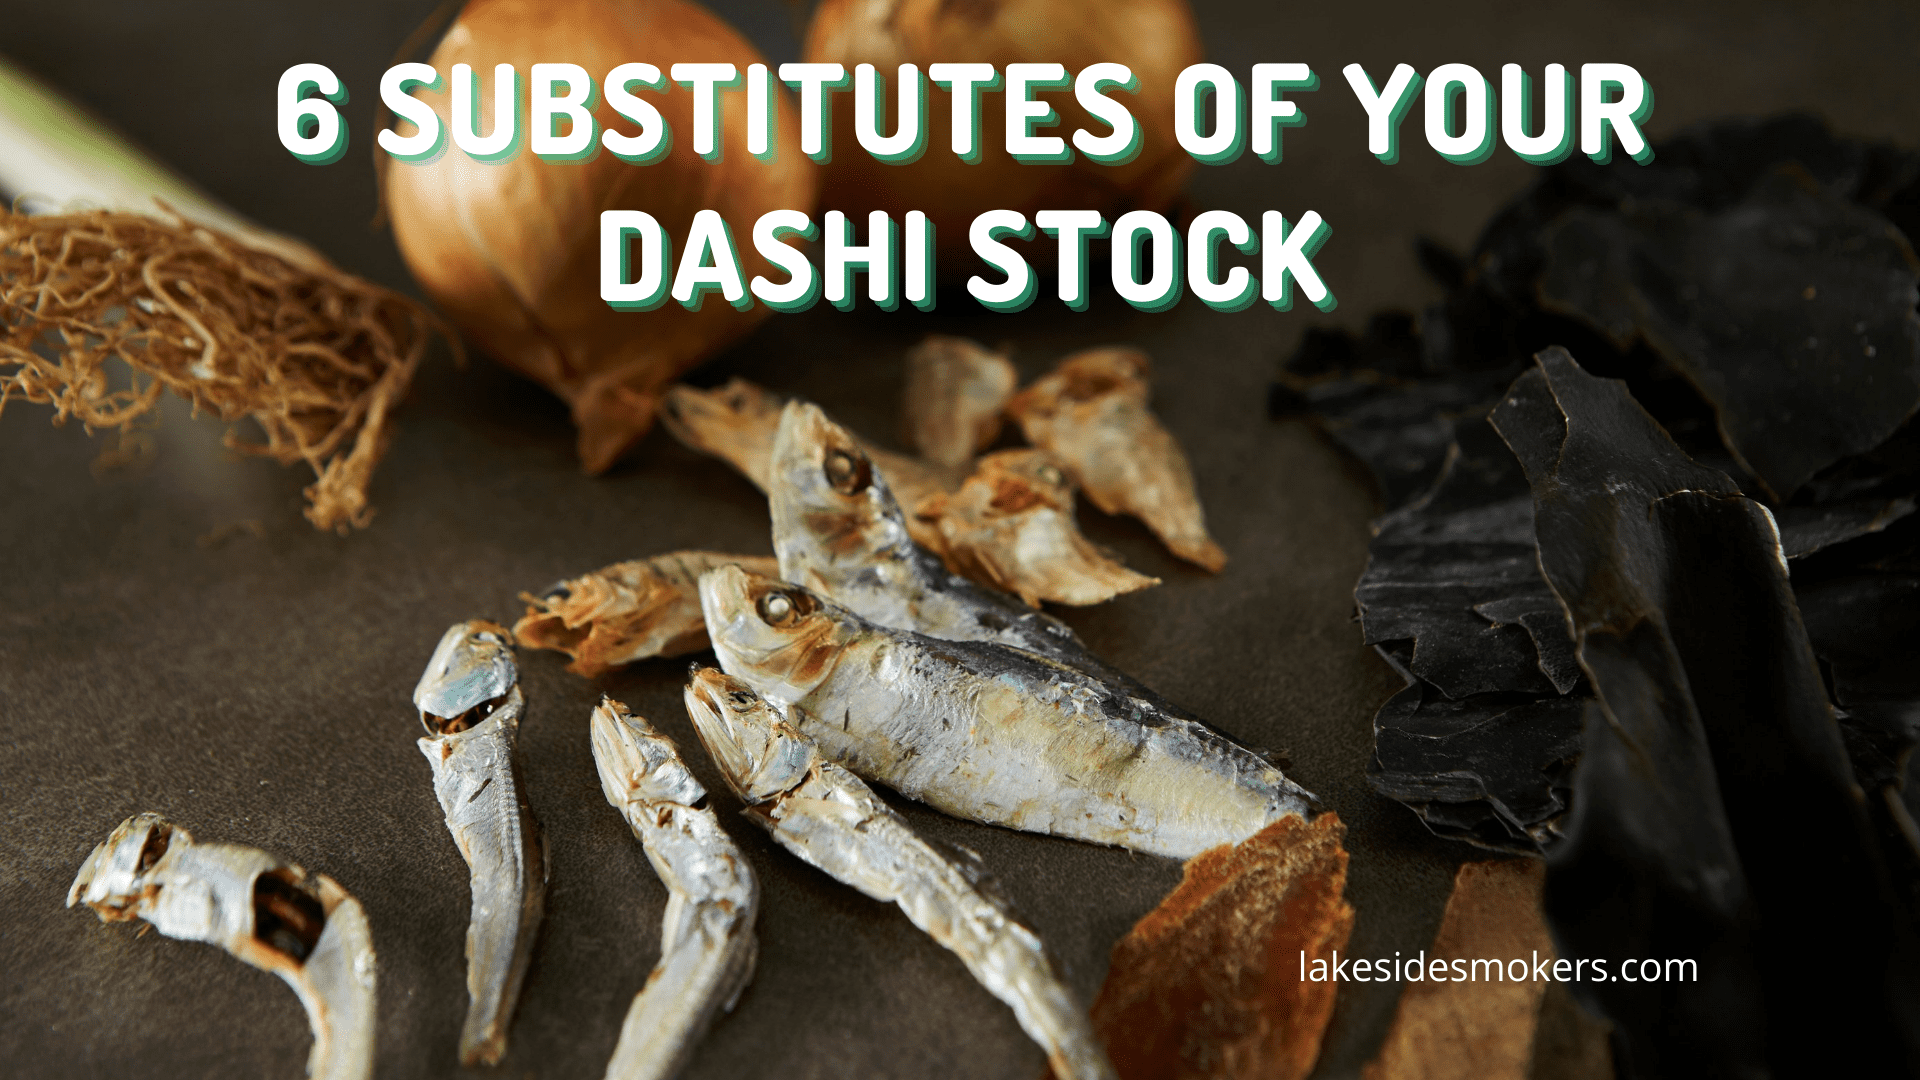 Don’t have dashi stock? Use these 6 secret substitutes instead!